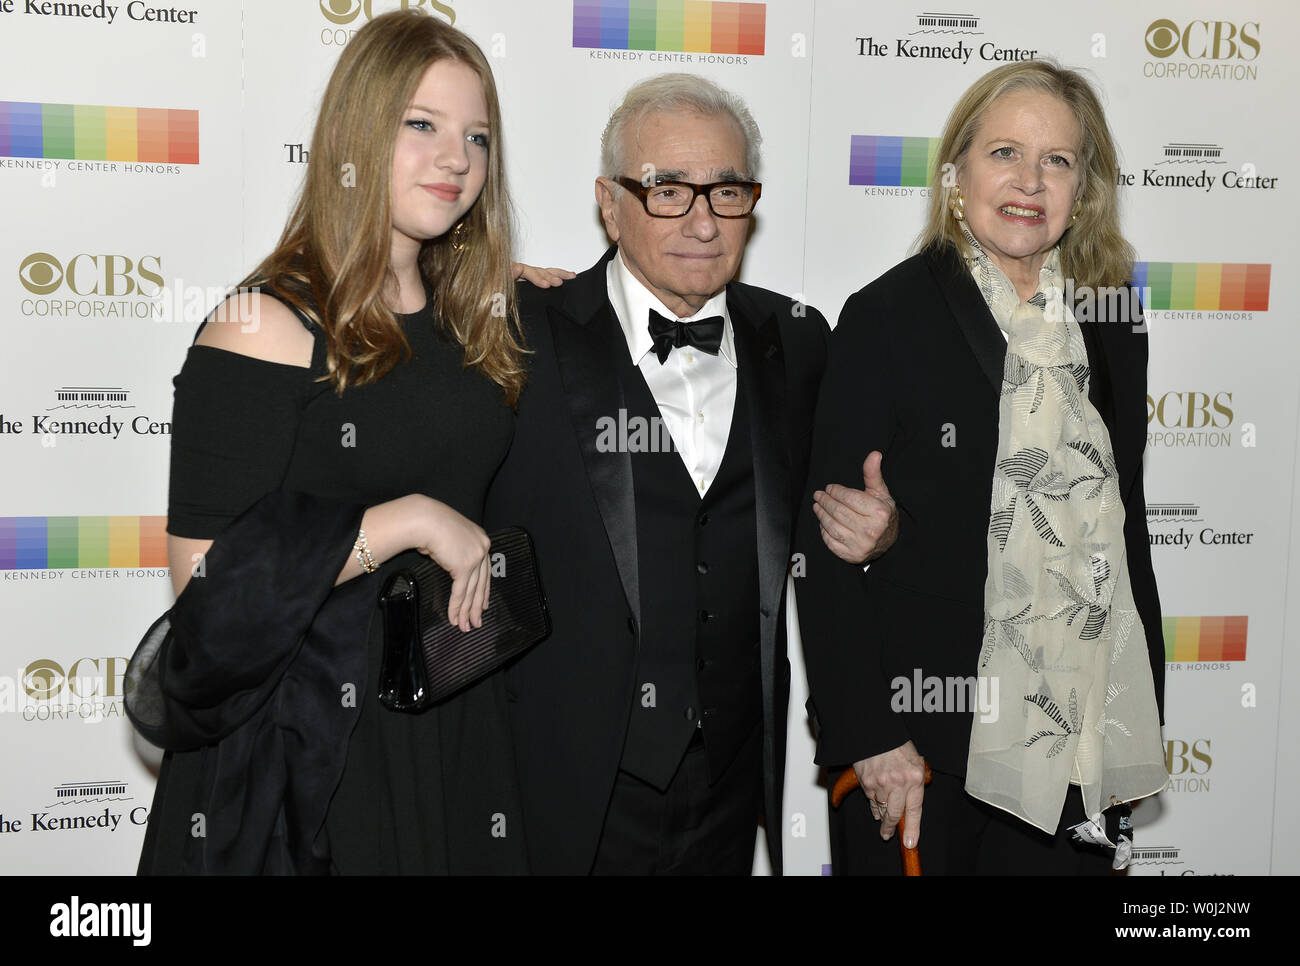 Film Director Martin Scorsese (C), his wife Helen Morris (R) and daughter Francesca pose for photographers on the red carpet as they arrive for an evening of gala entertainment at the Kennedy Center, December 6, 2015, in Washington, DC.  The Honors are bestowed annually on five artists for their lifetime achievement in the arts and culture.    UPI/Mike Theiler Stock Photo